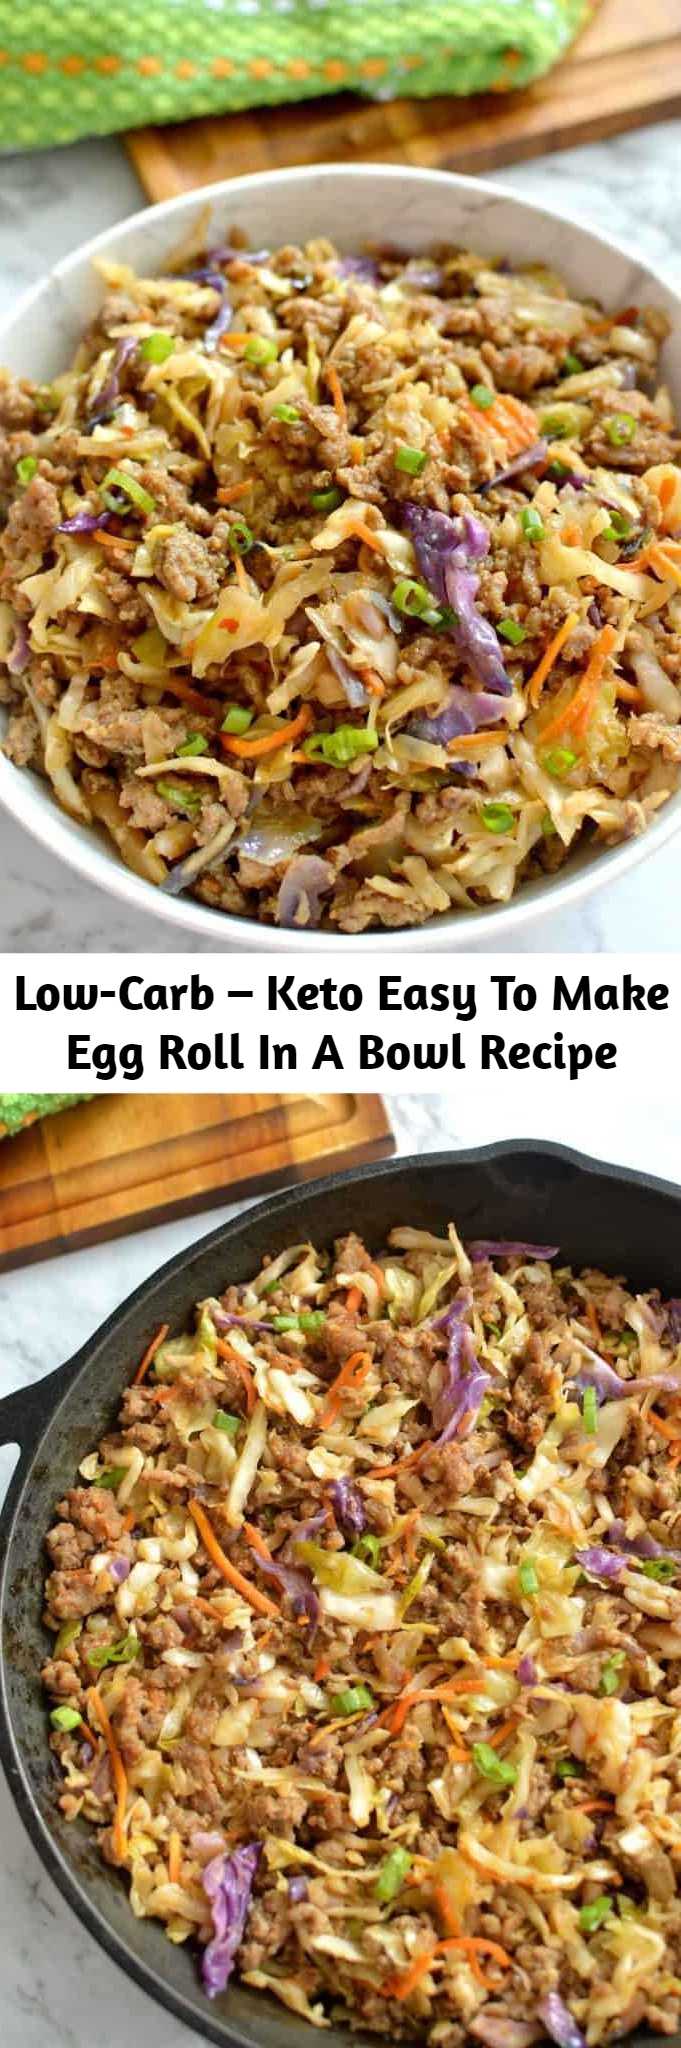 Low-Carb – Keto Easy To Make Egg Roll In A Bowl Recipe - This low carb easy to make egg roll in a bowl is an easy and delicious recipe to make on busy weeknights! Scroll down for the keto-friendly recipe that only takes 15 minutes to make!! #lowcarb #ketorecipes #lowcarbdinner #keto #ketodiet #eggrollinabowl #eggrollbowl #eggroll